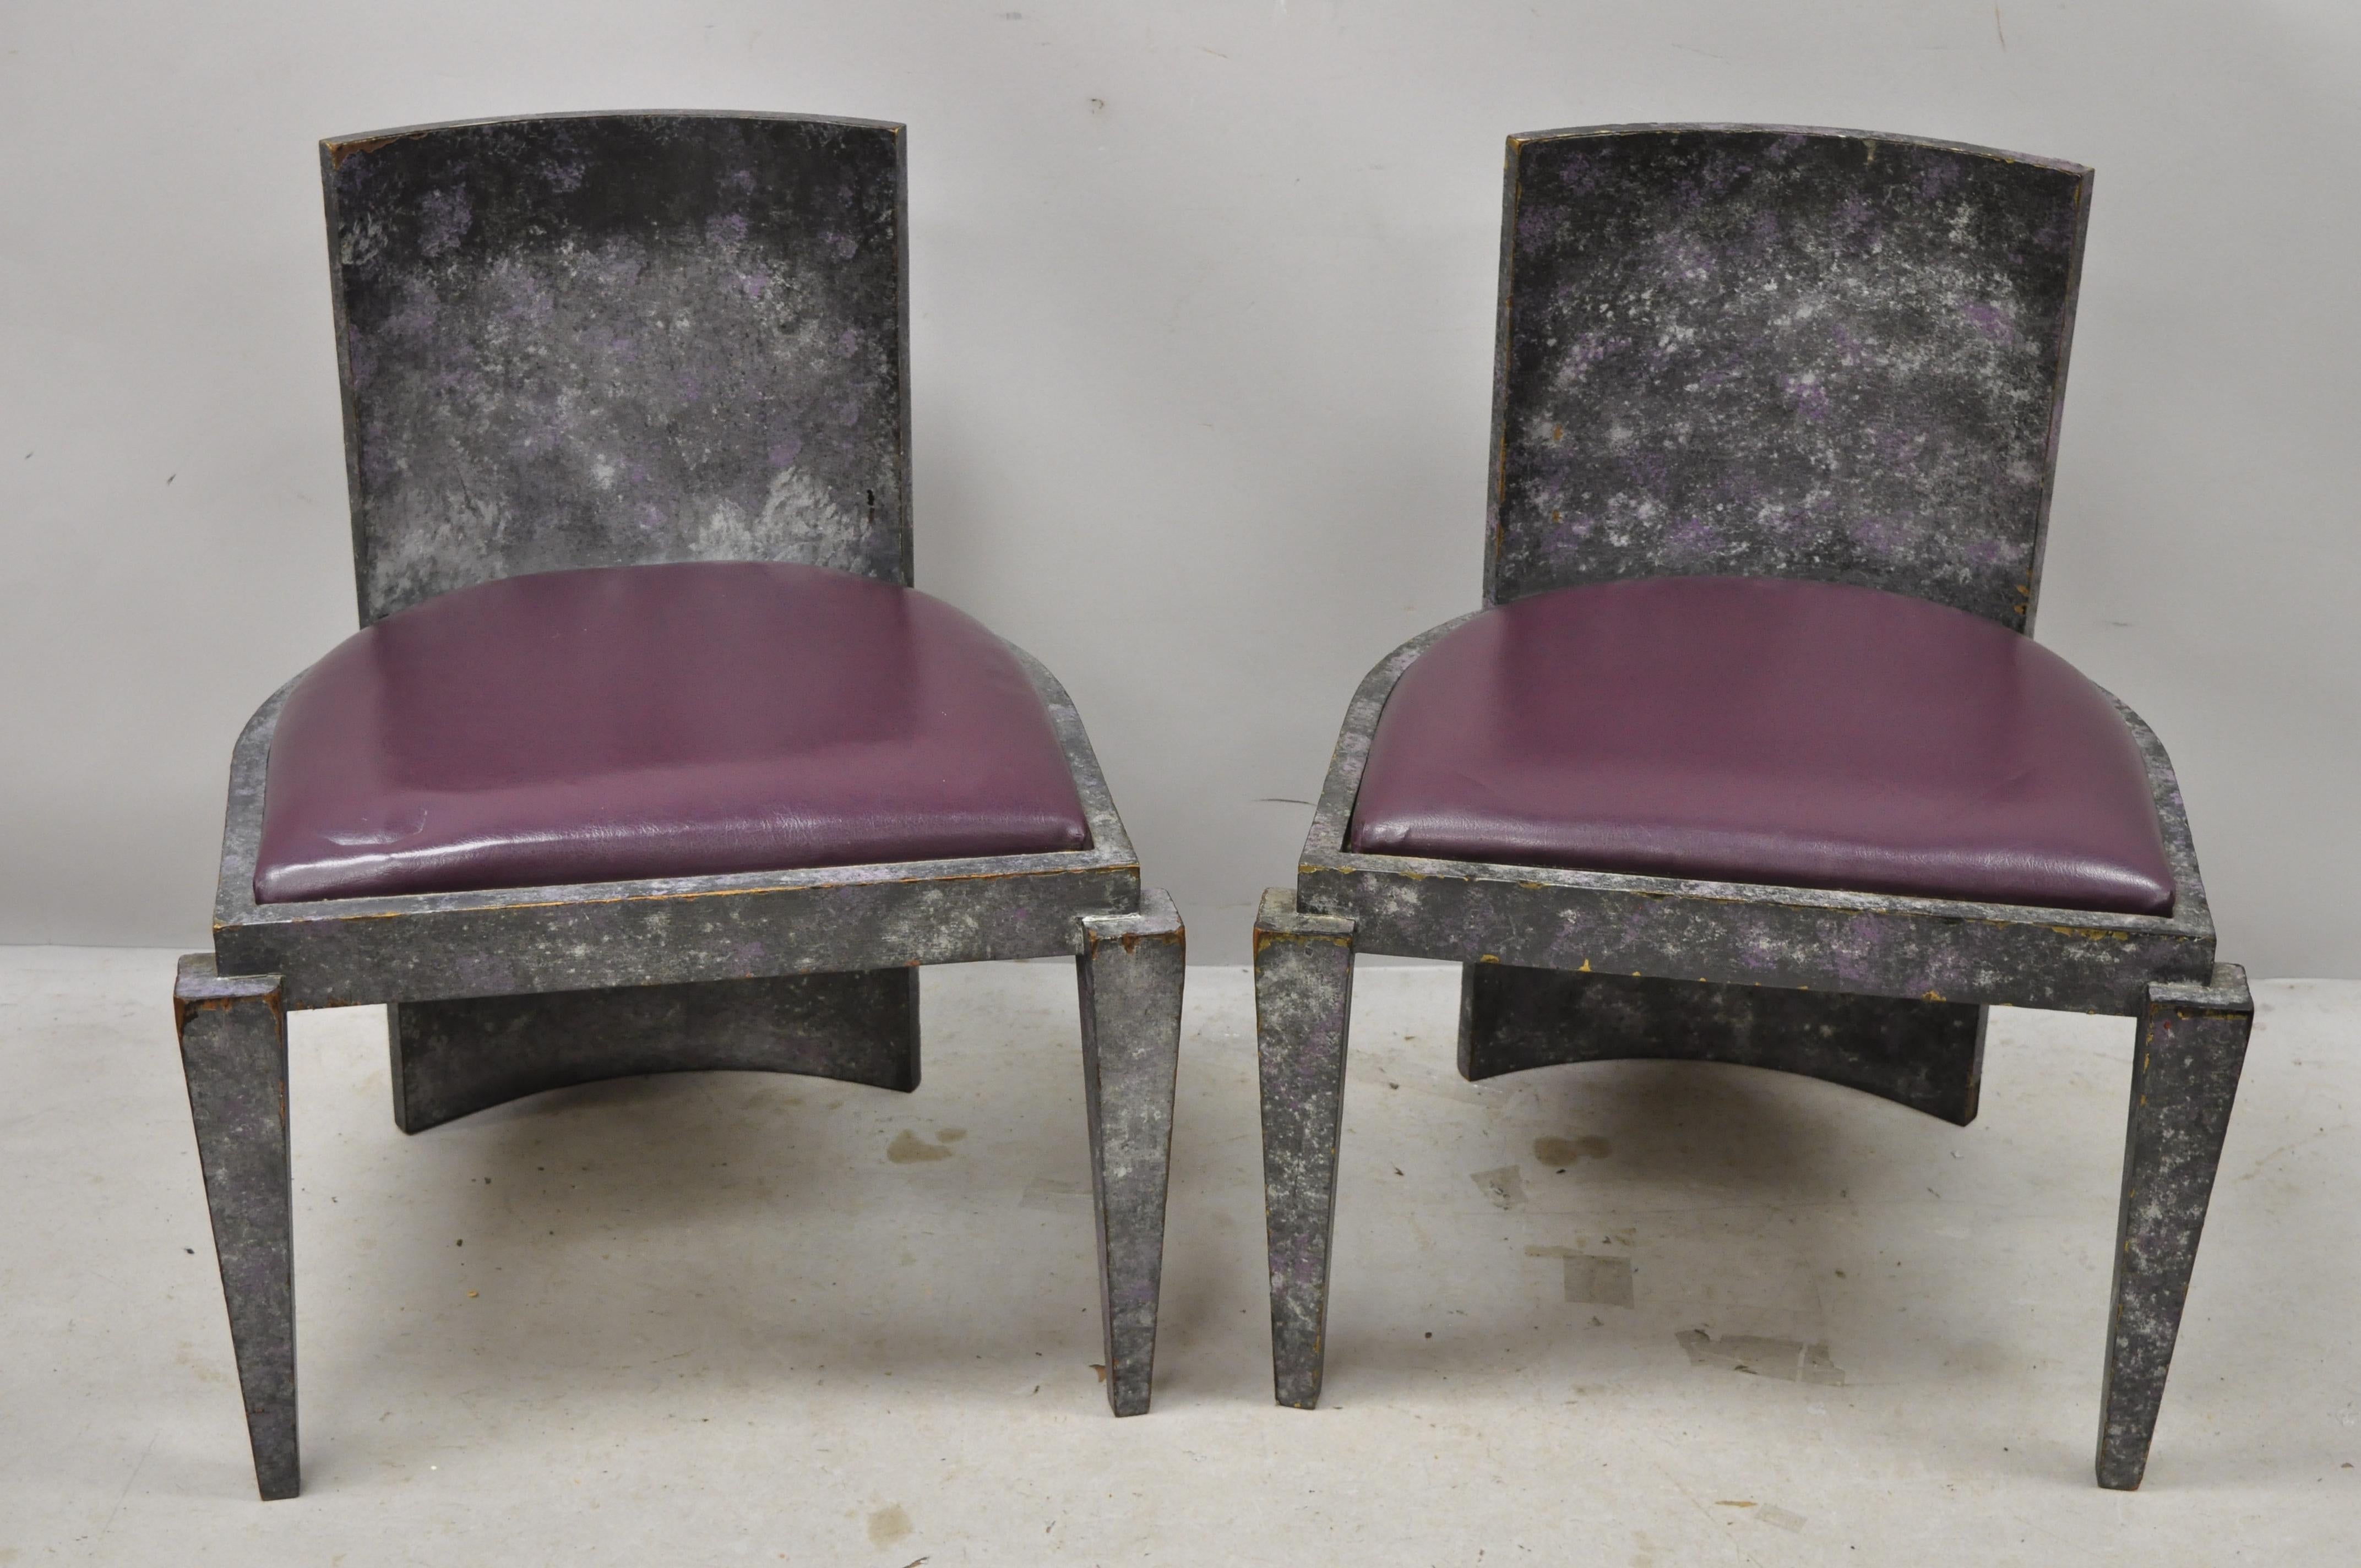 Vintage Mid-Century Modern Art Deco Purple and Gray Club Game Chairs, a Pair For Sale 6